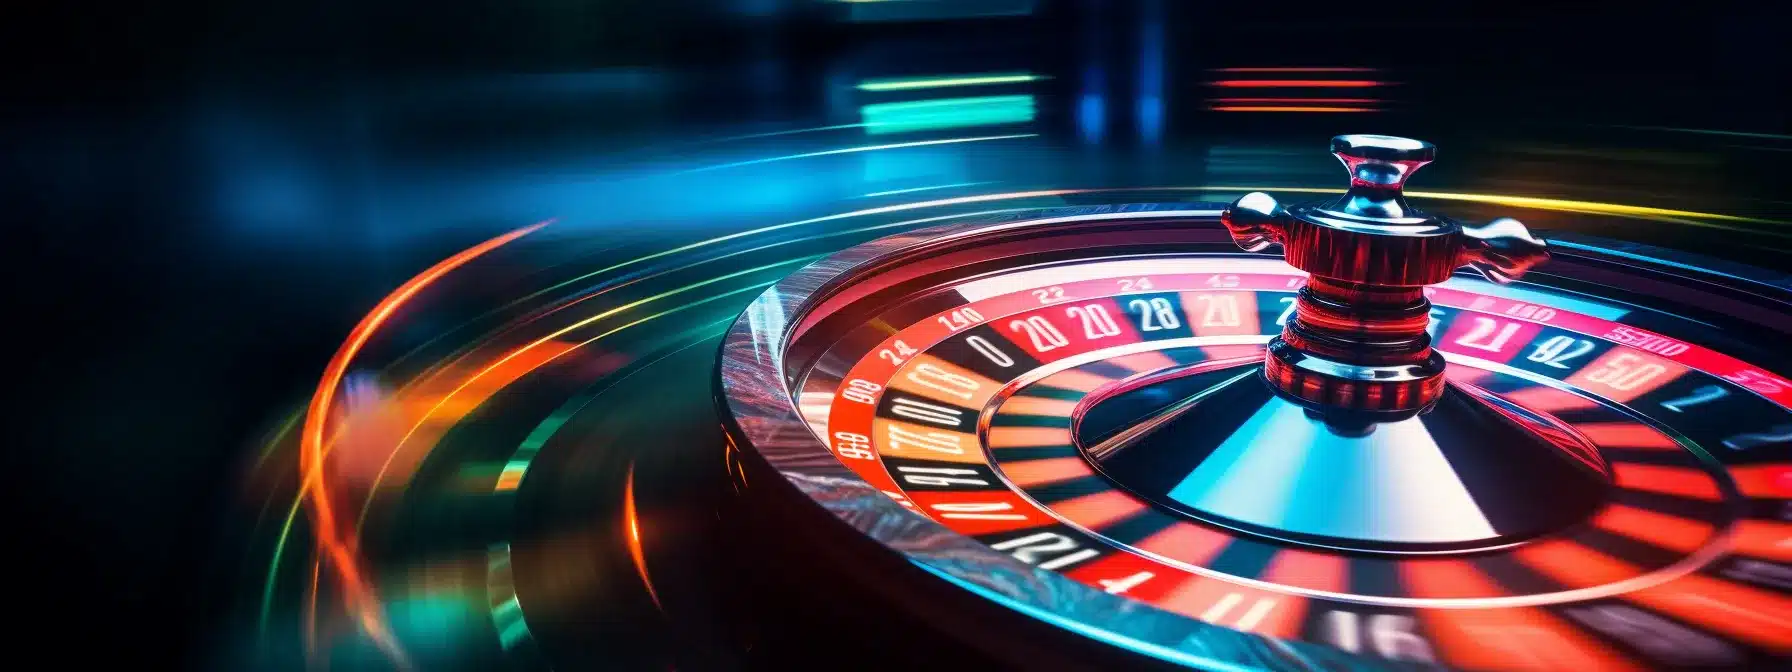 A Spinning Roulette Wheel With Anticipation And Excitement In The Air.